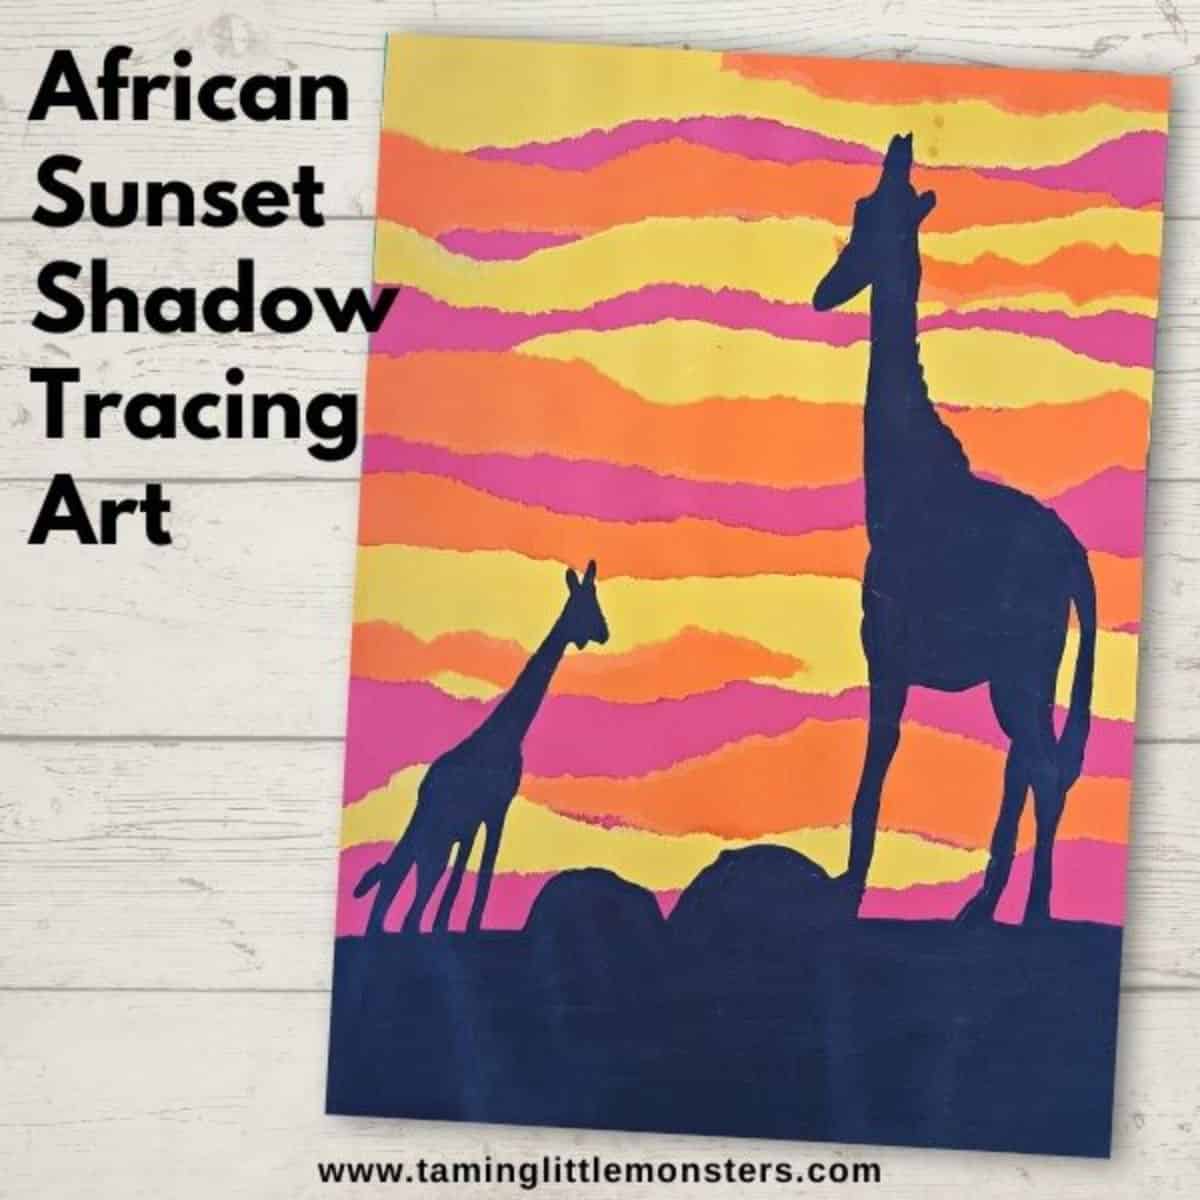 African Sunset Shadow Tracing Art